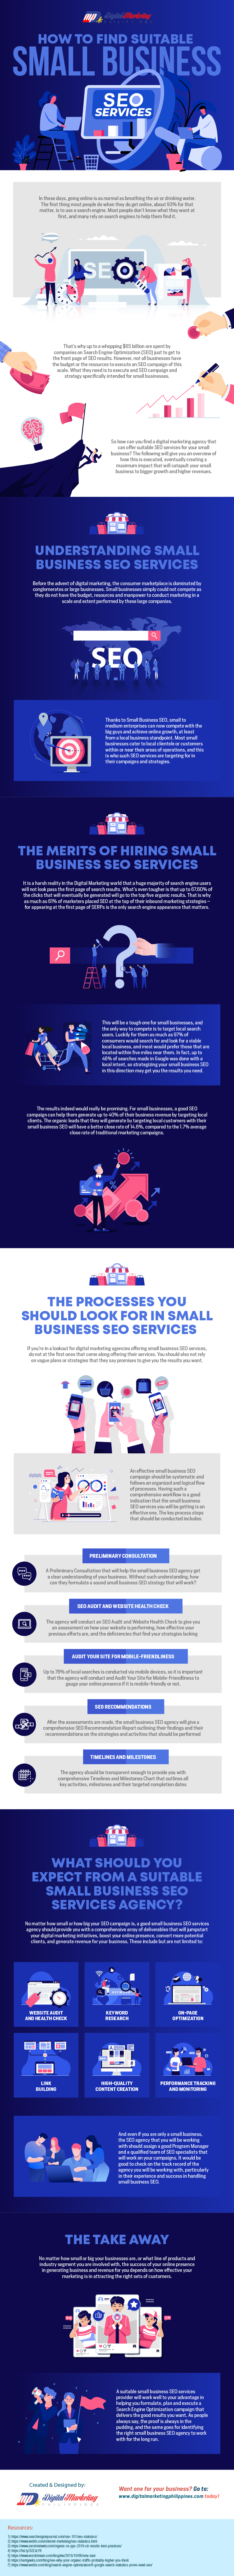 How to Find Suitable Small Business SEO Services [Infographic]